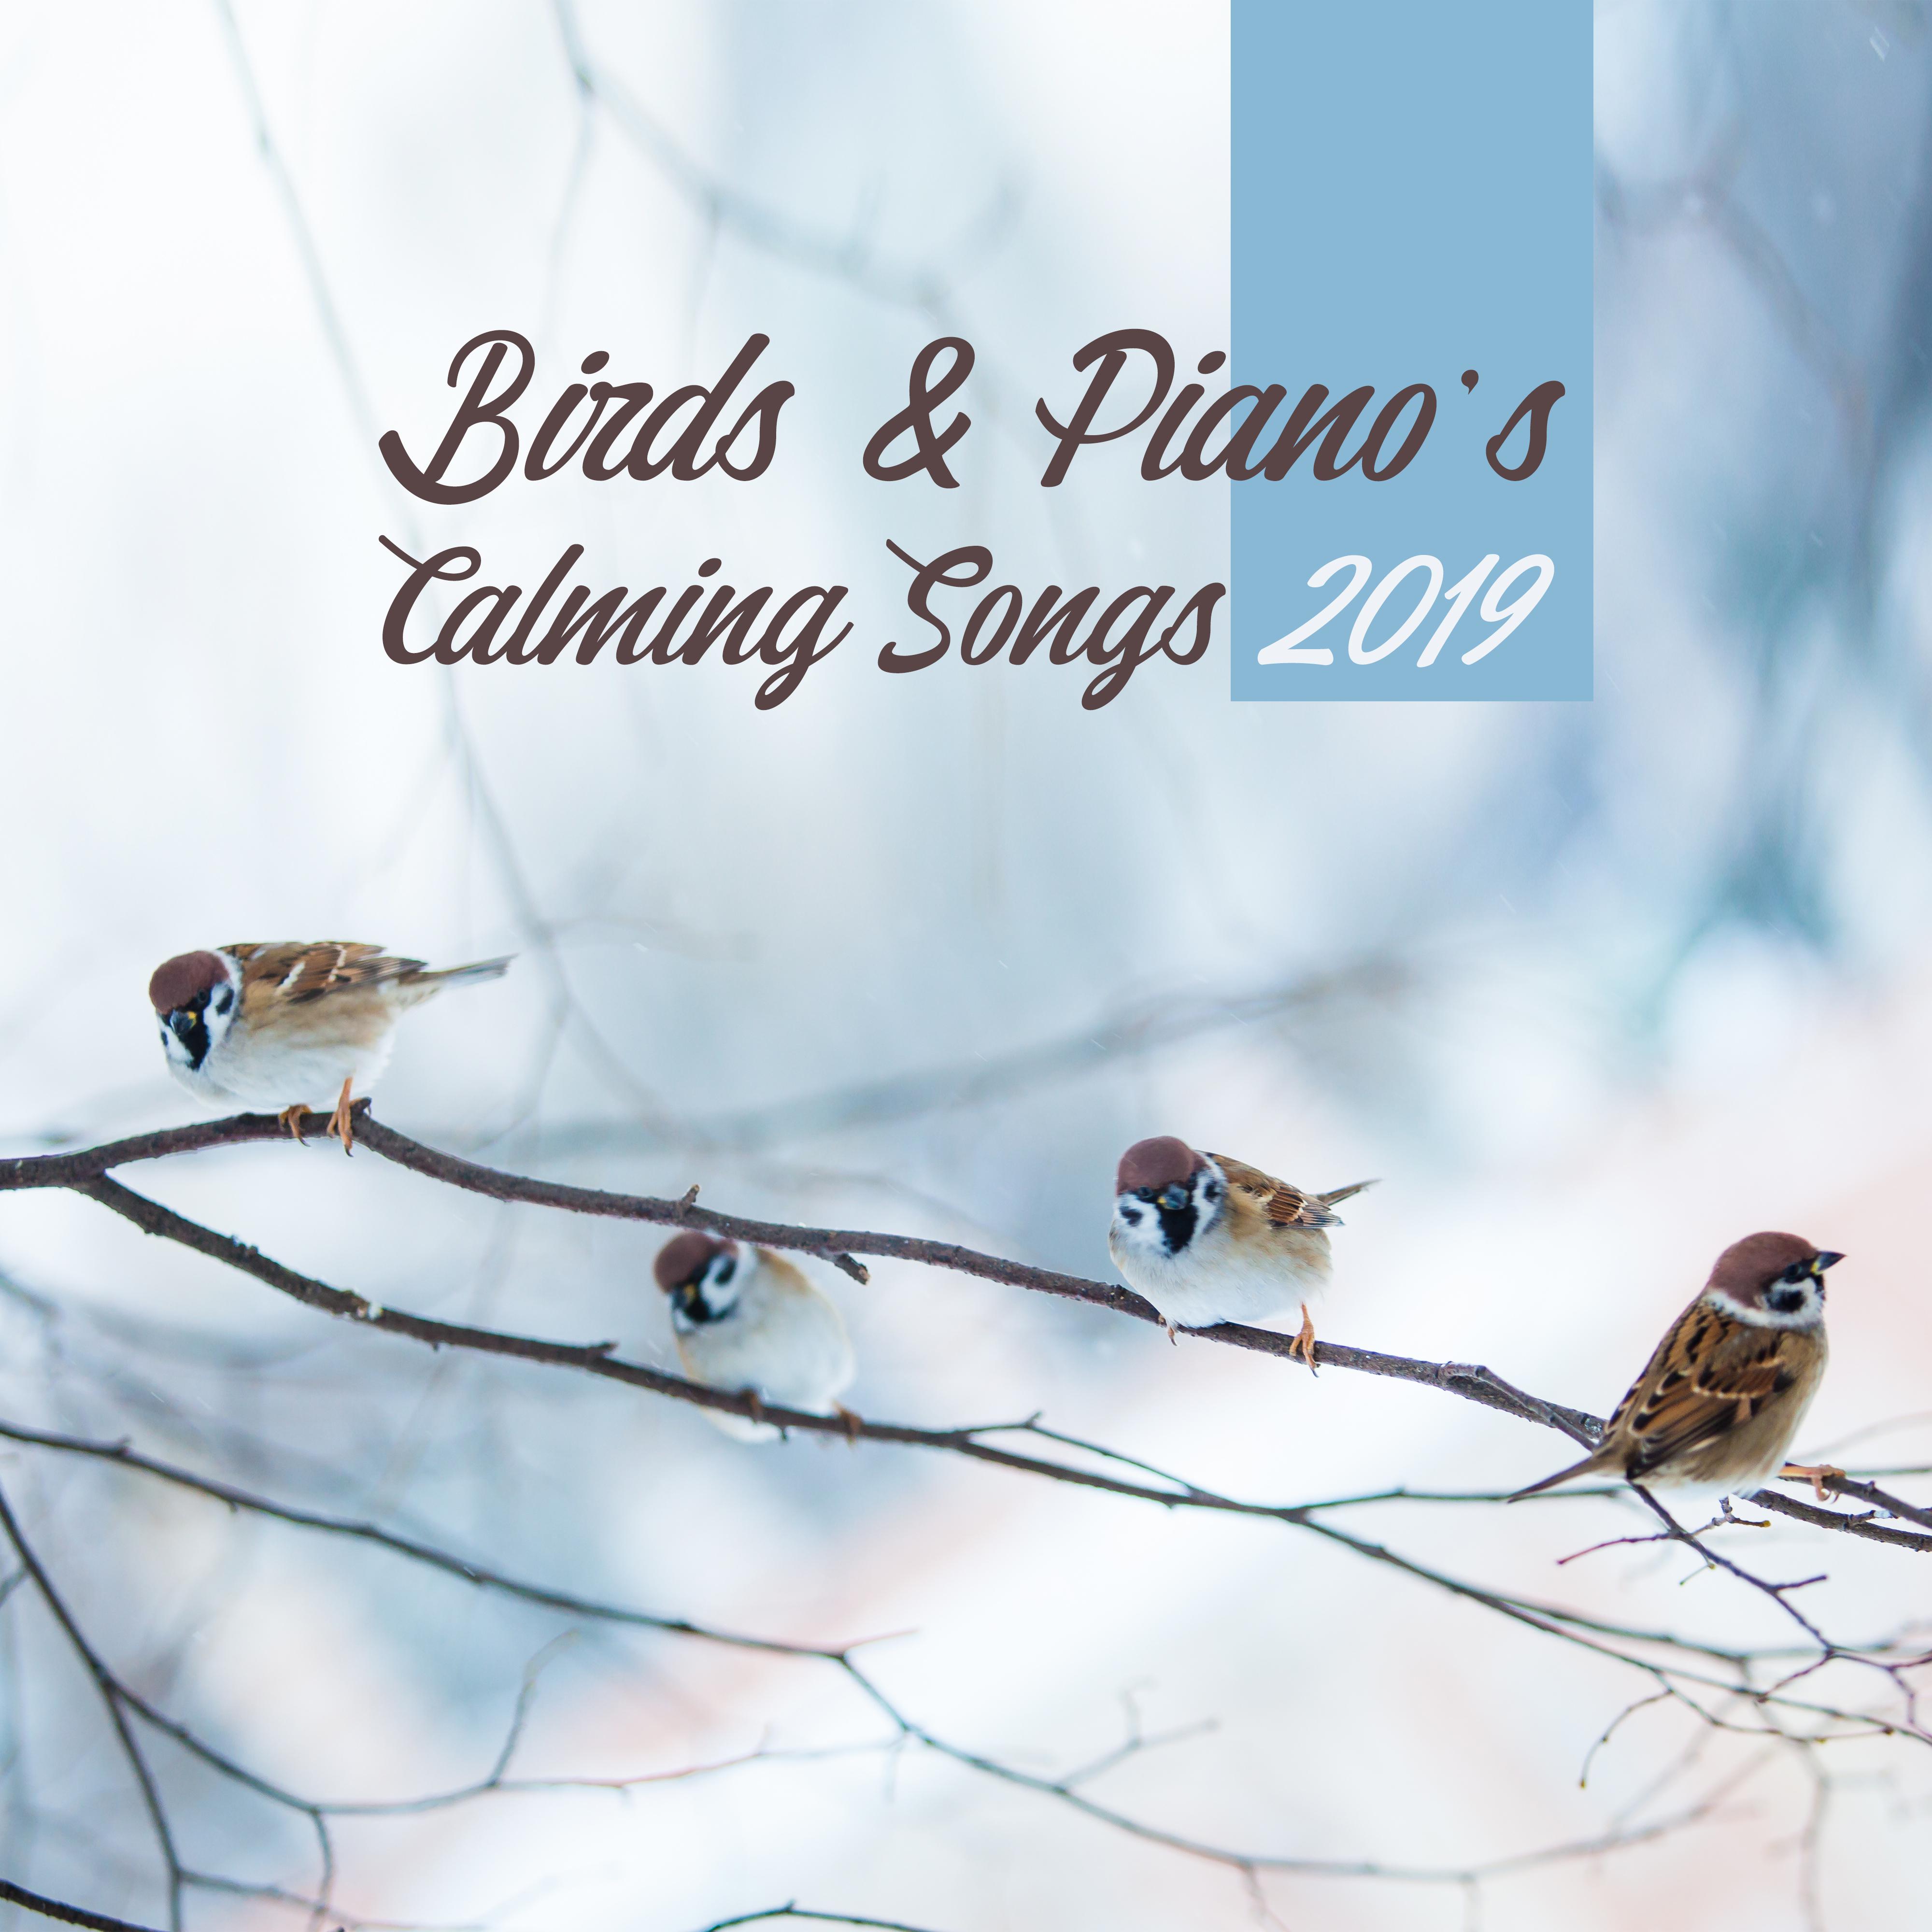 Birds & Piano's Calming Songs 2019: 15 New Age Smooth Tracks with Birds & Piano Sounds, Perfect Relaxation Music, Nature Soothing Melodies